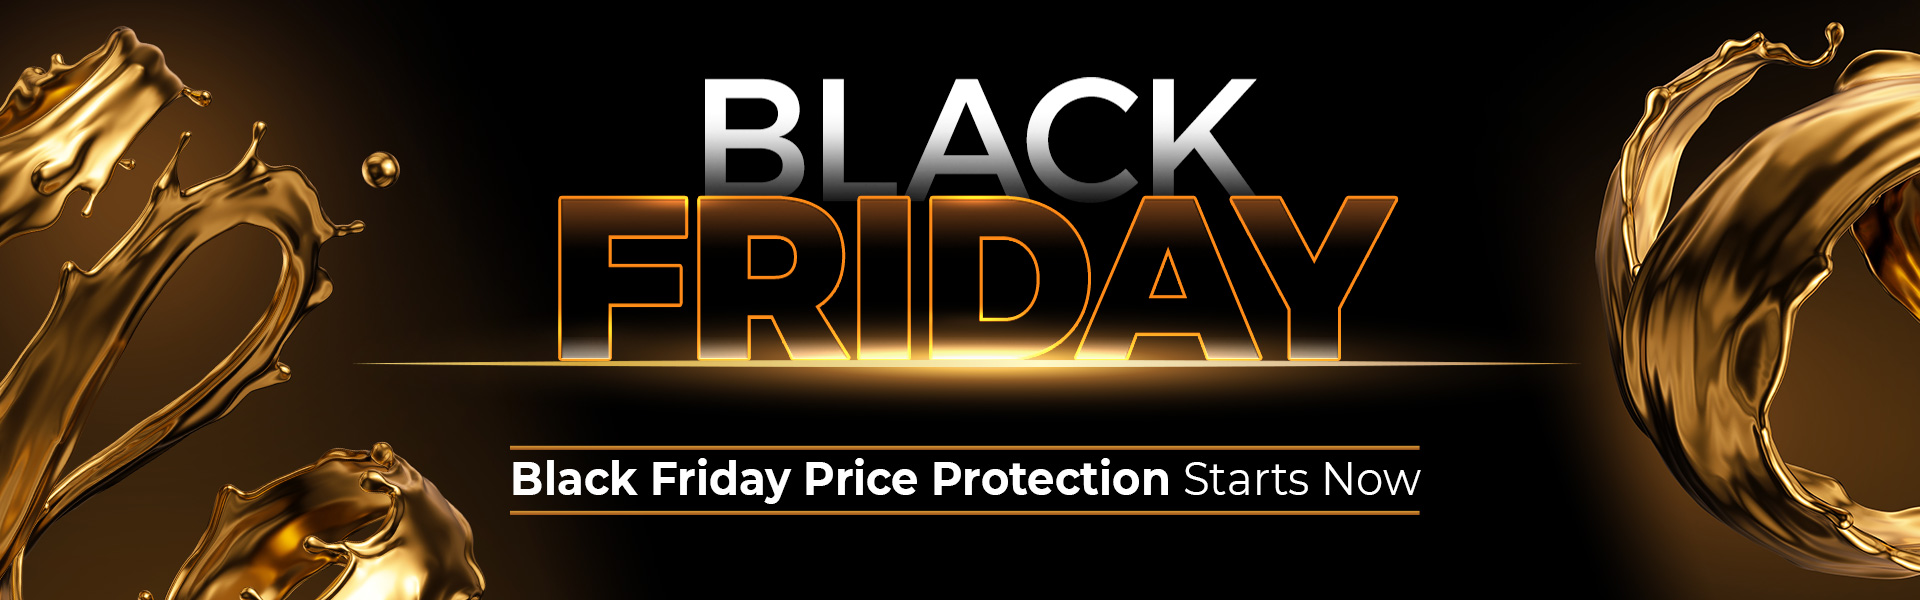 Newegg Unveils Black Friday Price Protection Program to Help Customers Shop Early with Confidence this Holiday Season